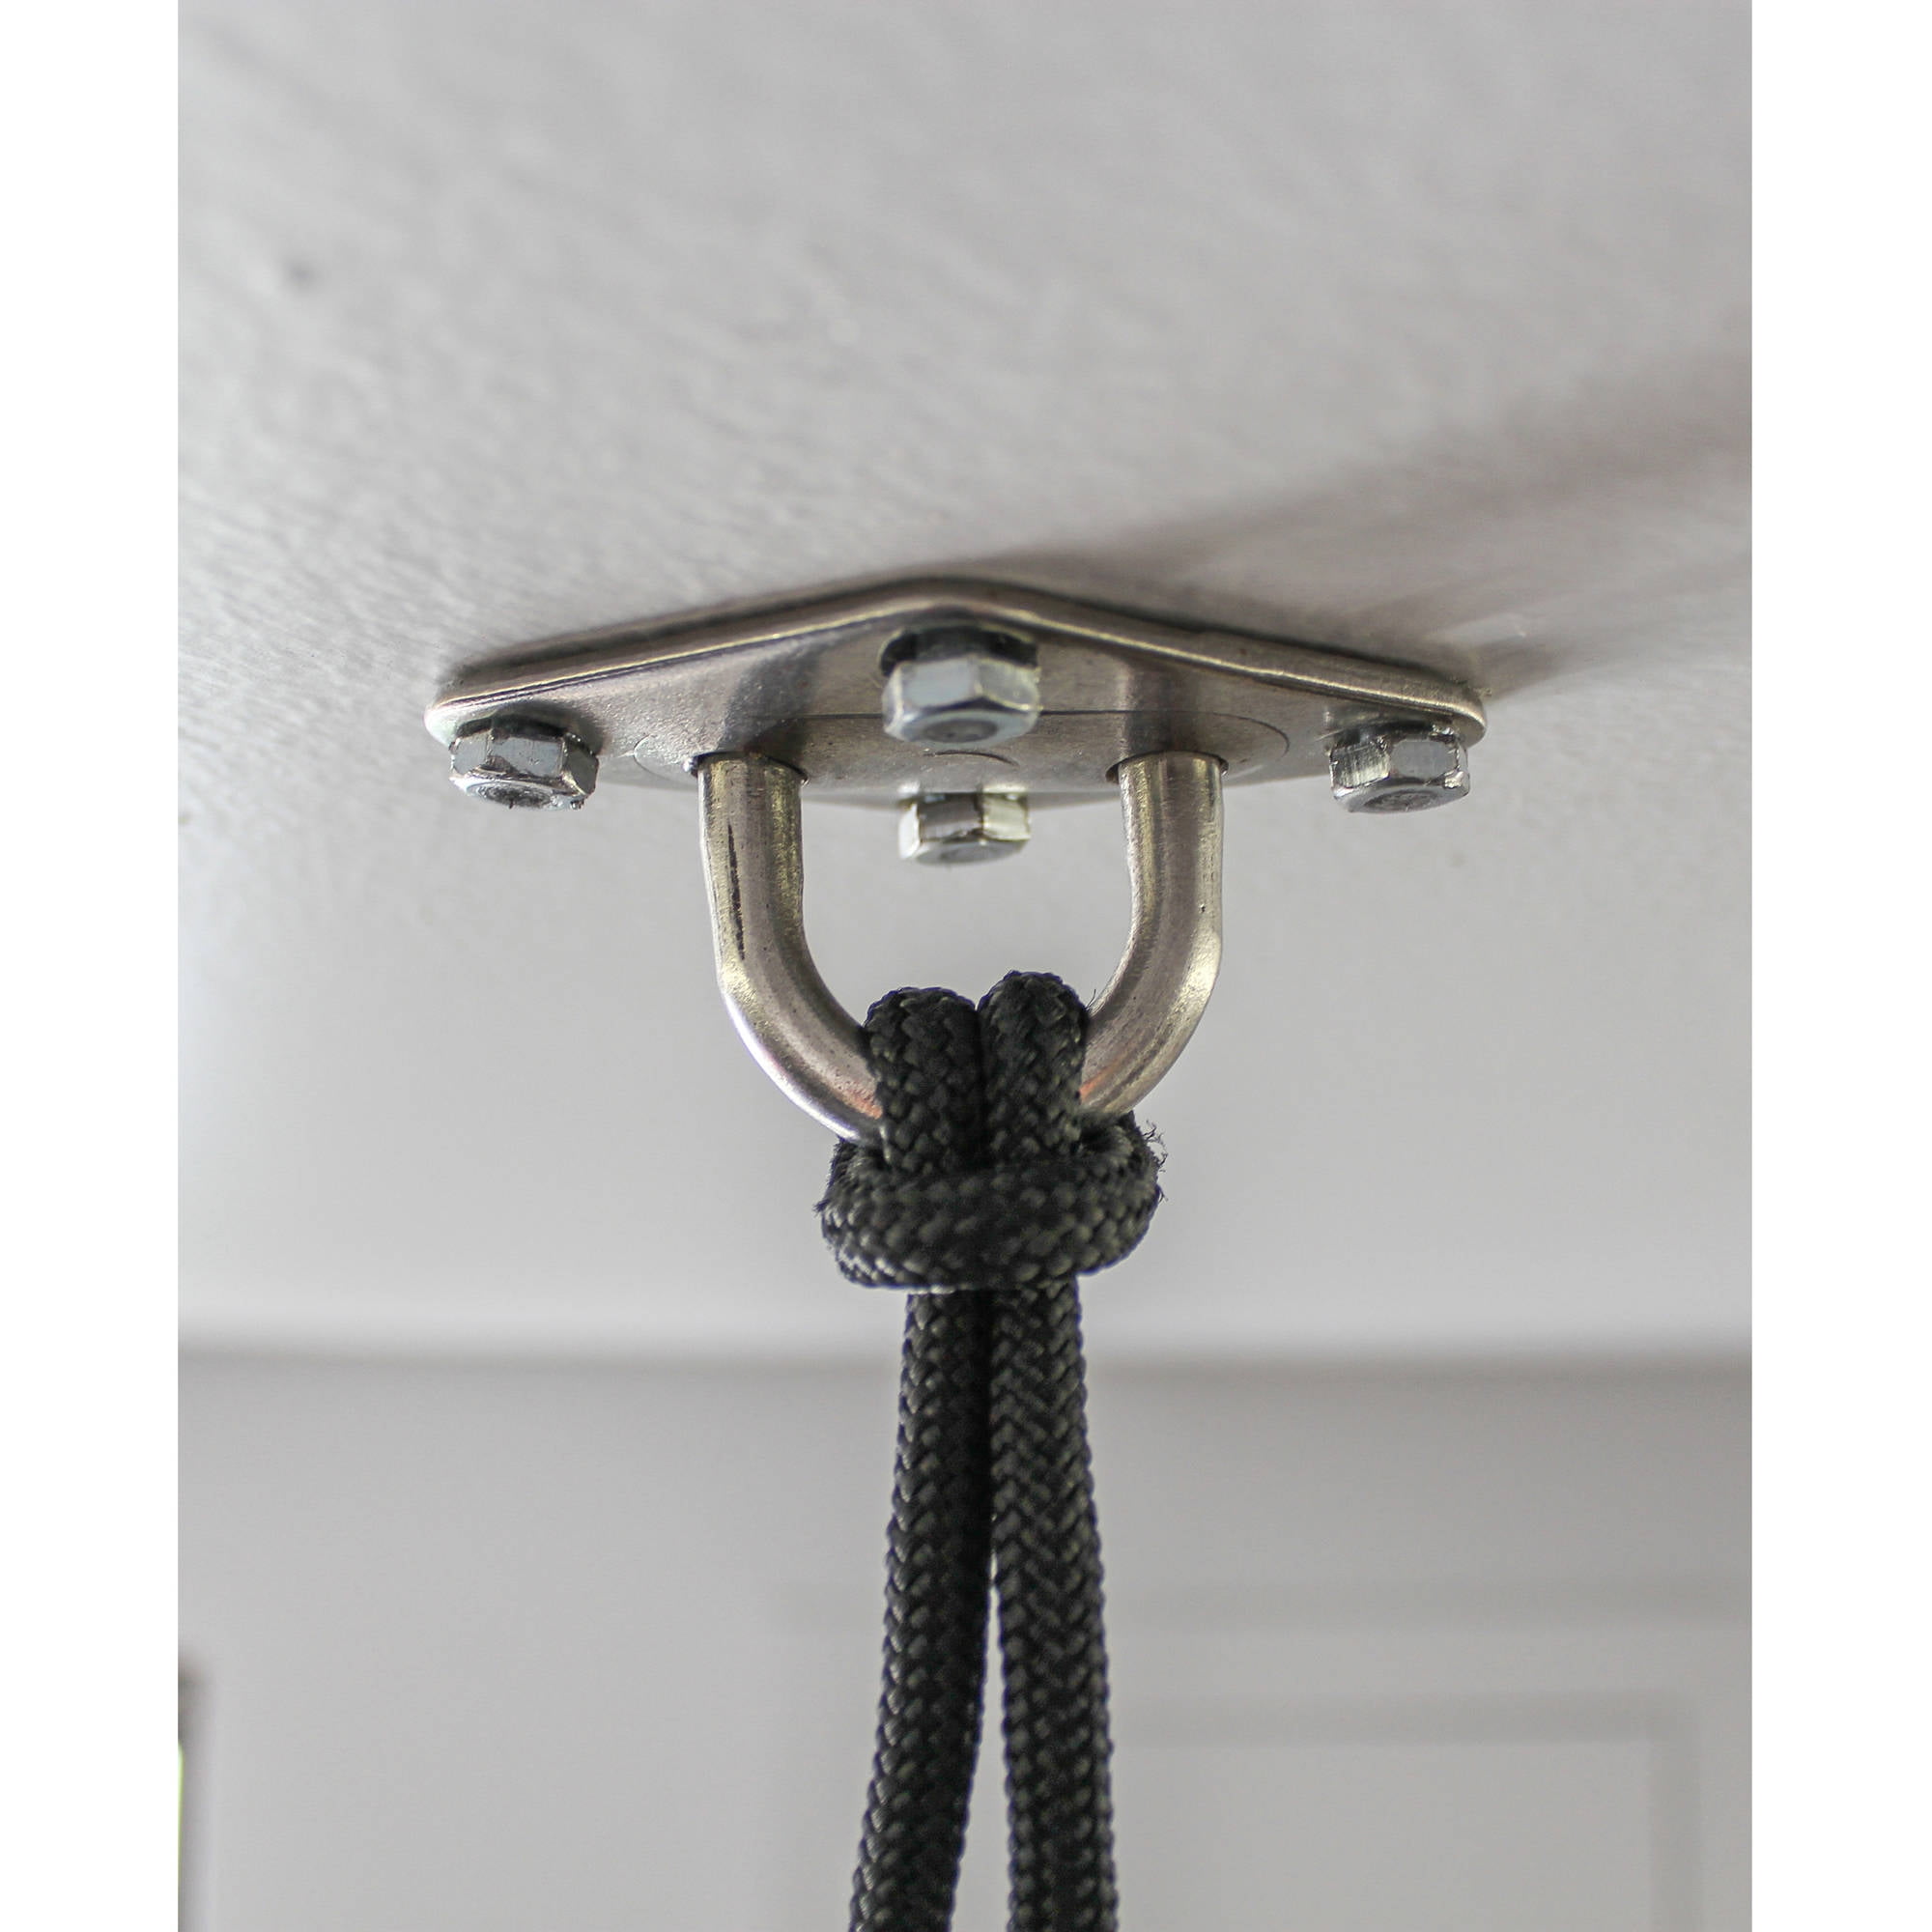 Slackers Indoor Ceiling Hanging Hardware for Sky Chairs ...